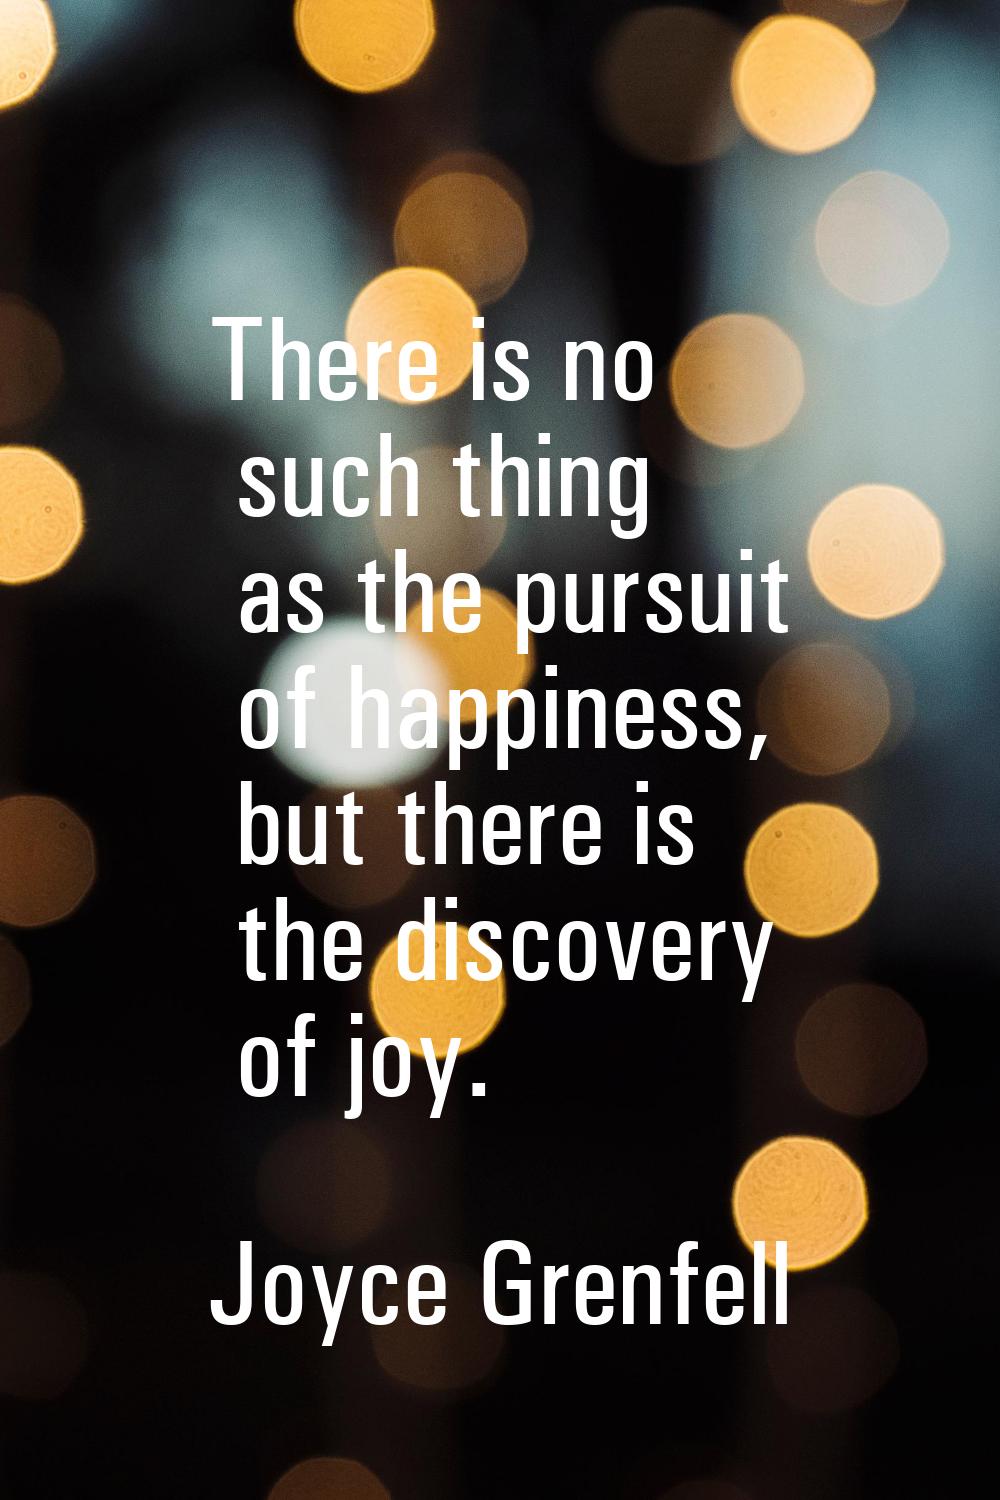 There is no such thing as the pursuit of happiness, but there is the discovery of joy.